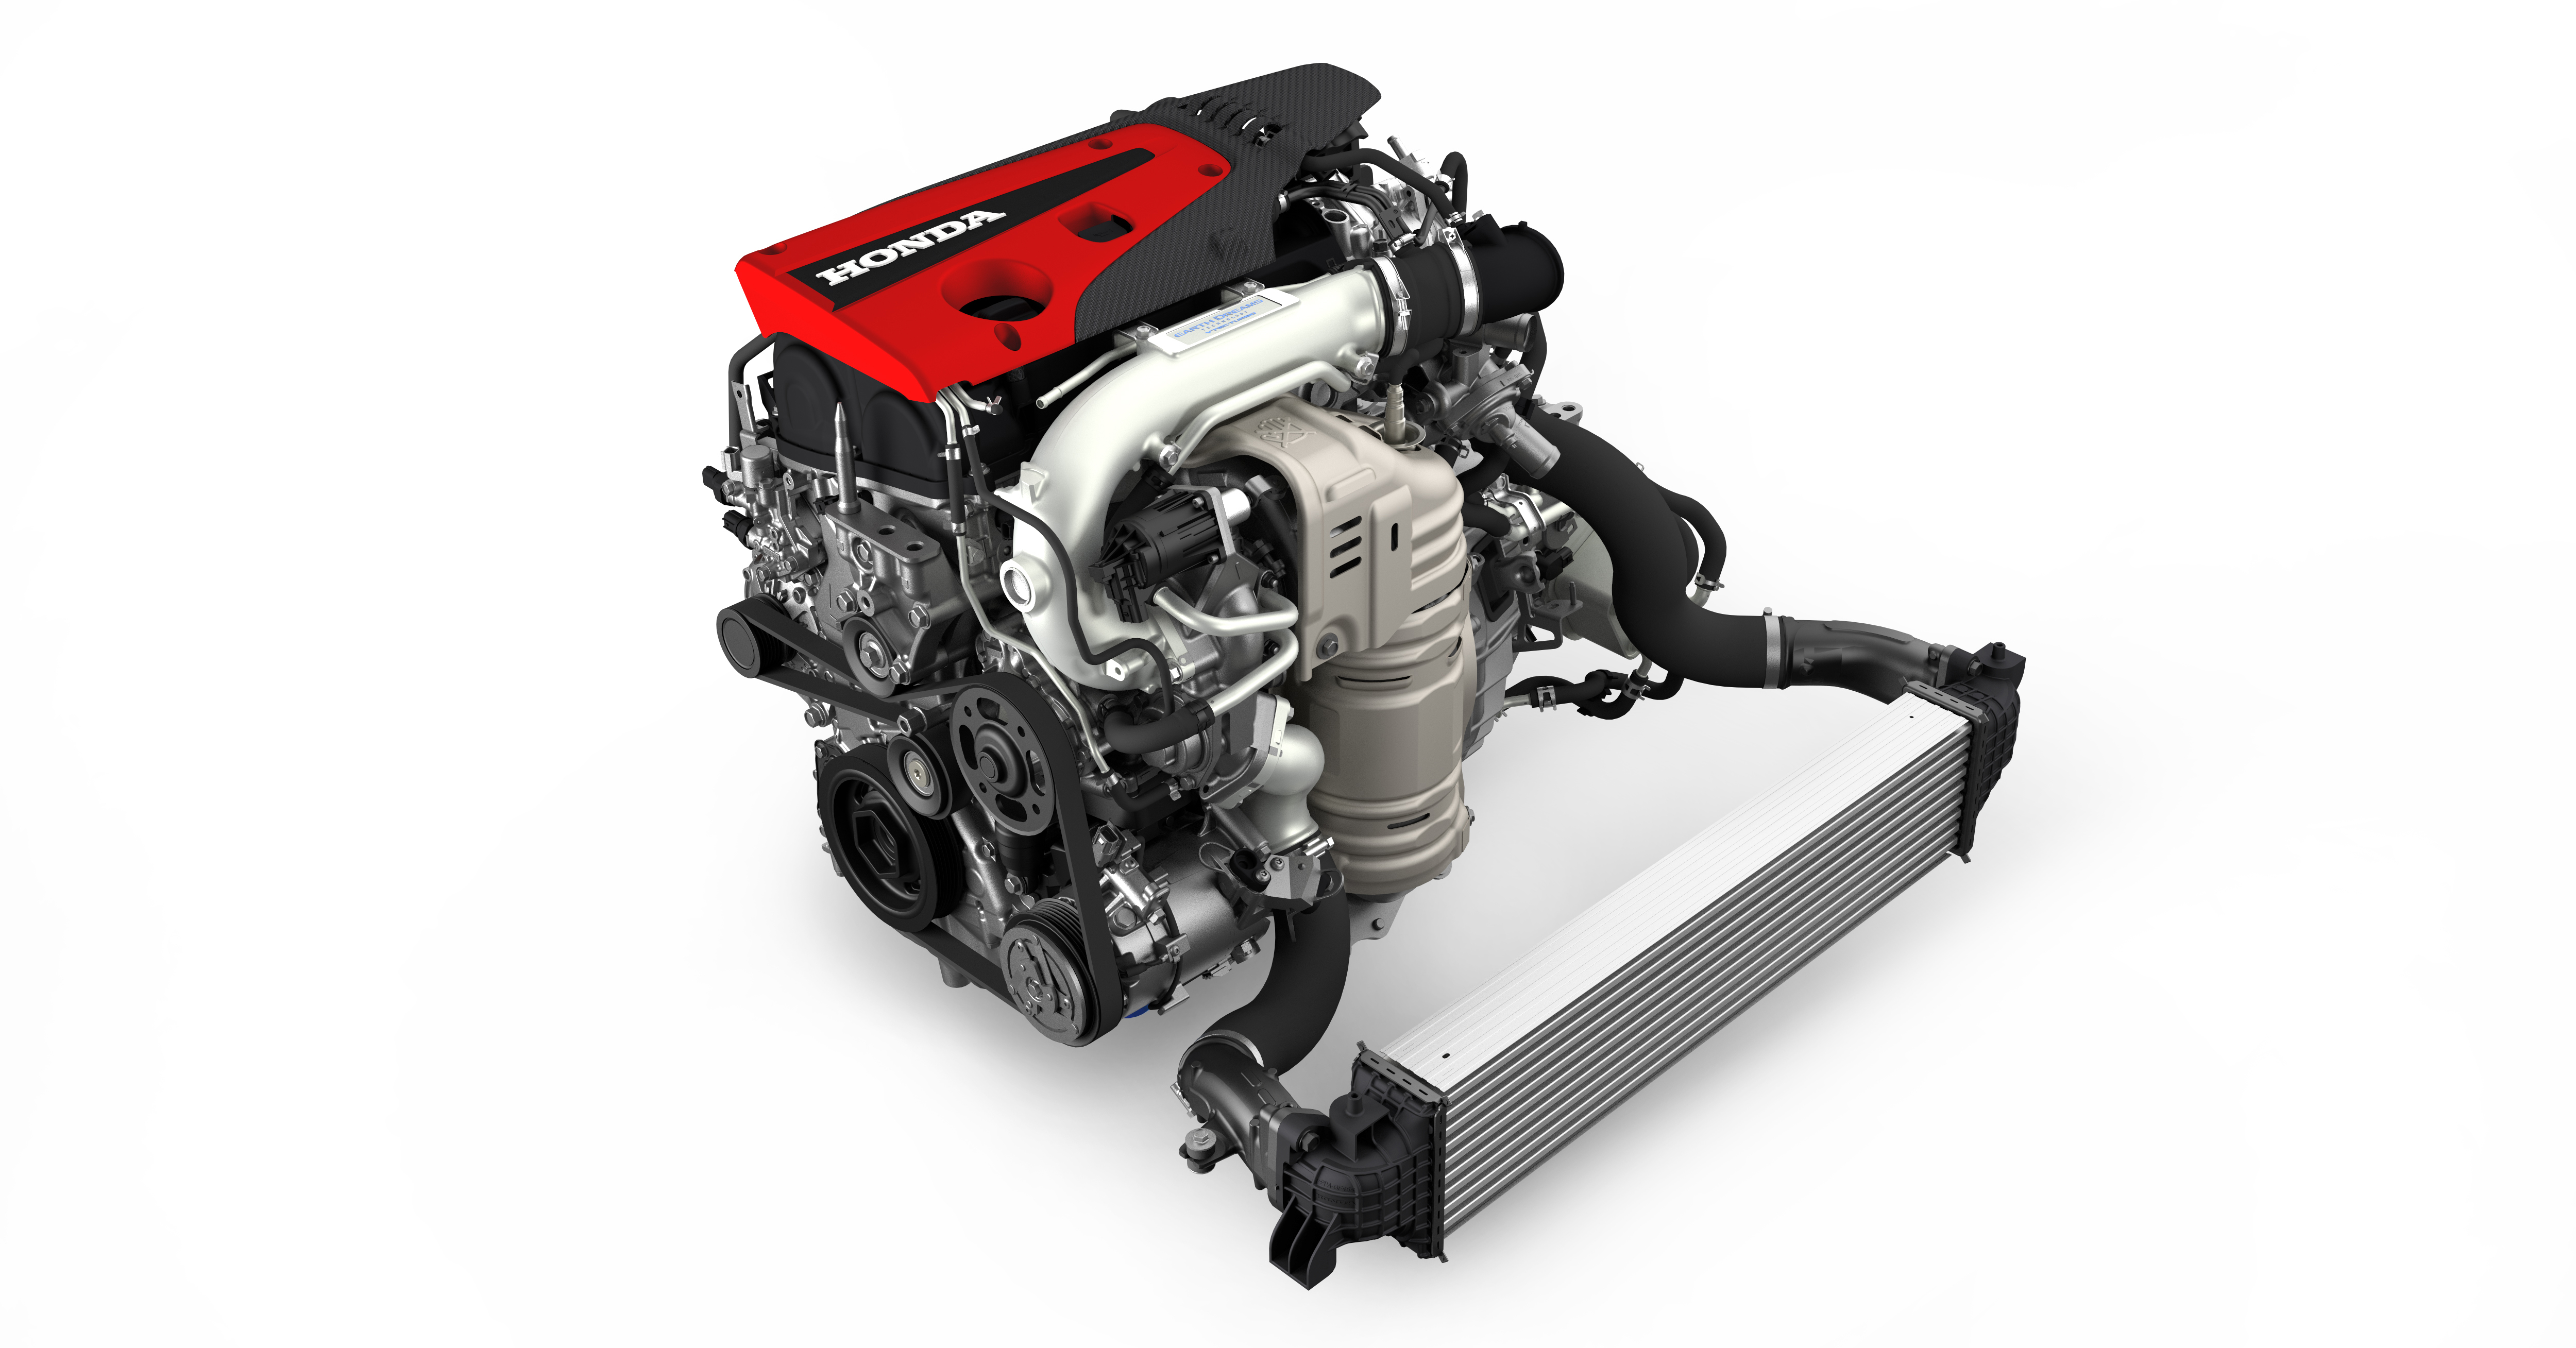 Honda announces Civic Type R crate engine purchase programme along with other exhibits at SEMA